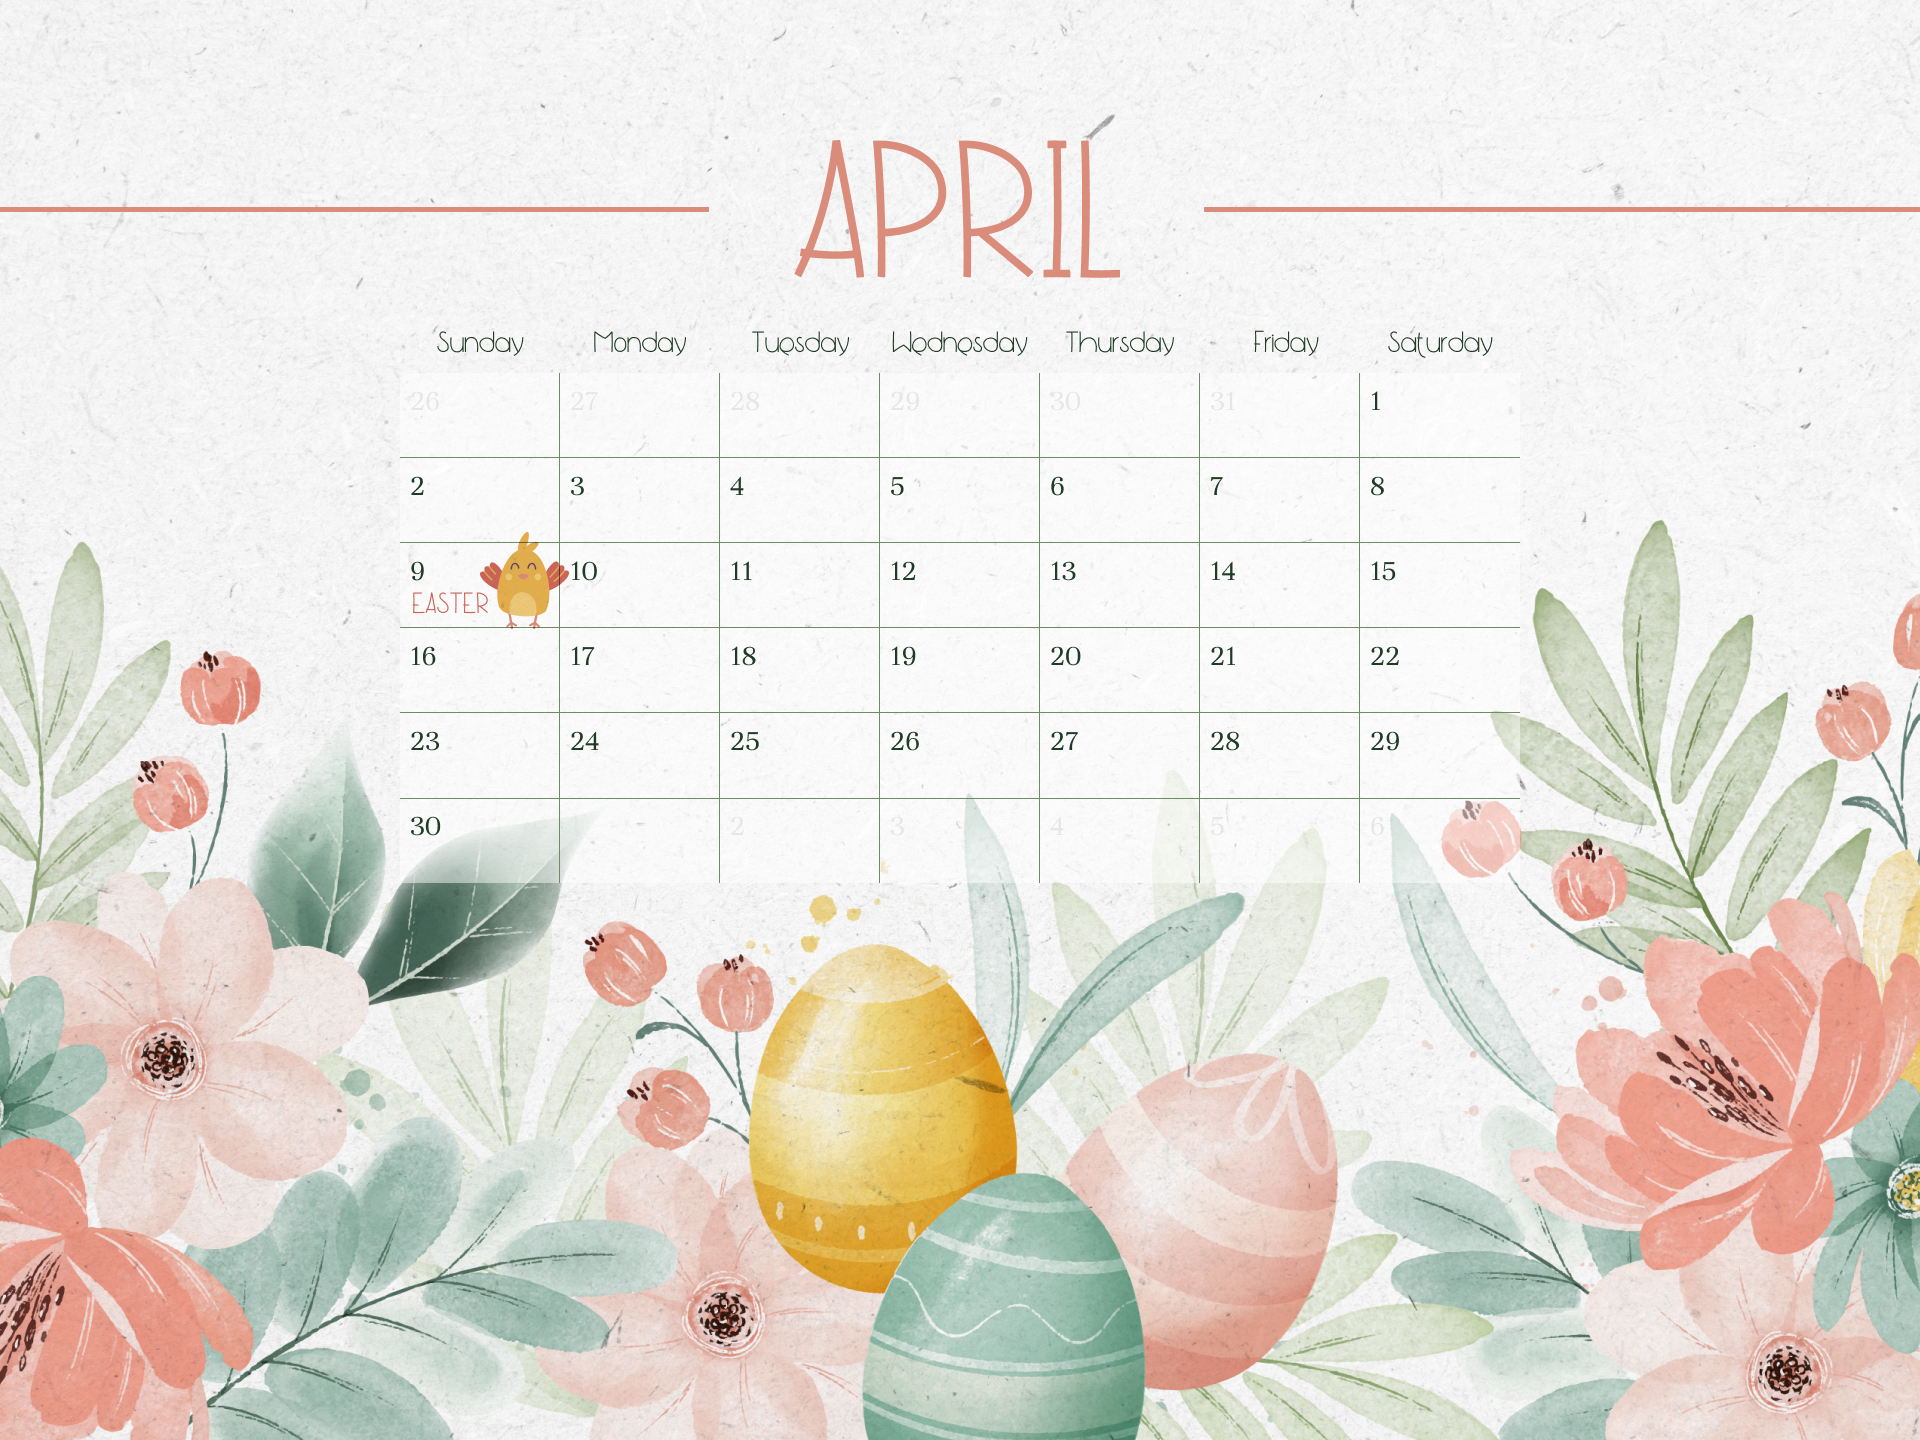 Calendar with flowers and eggs on it.